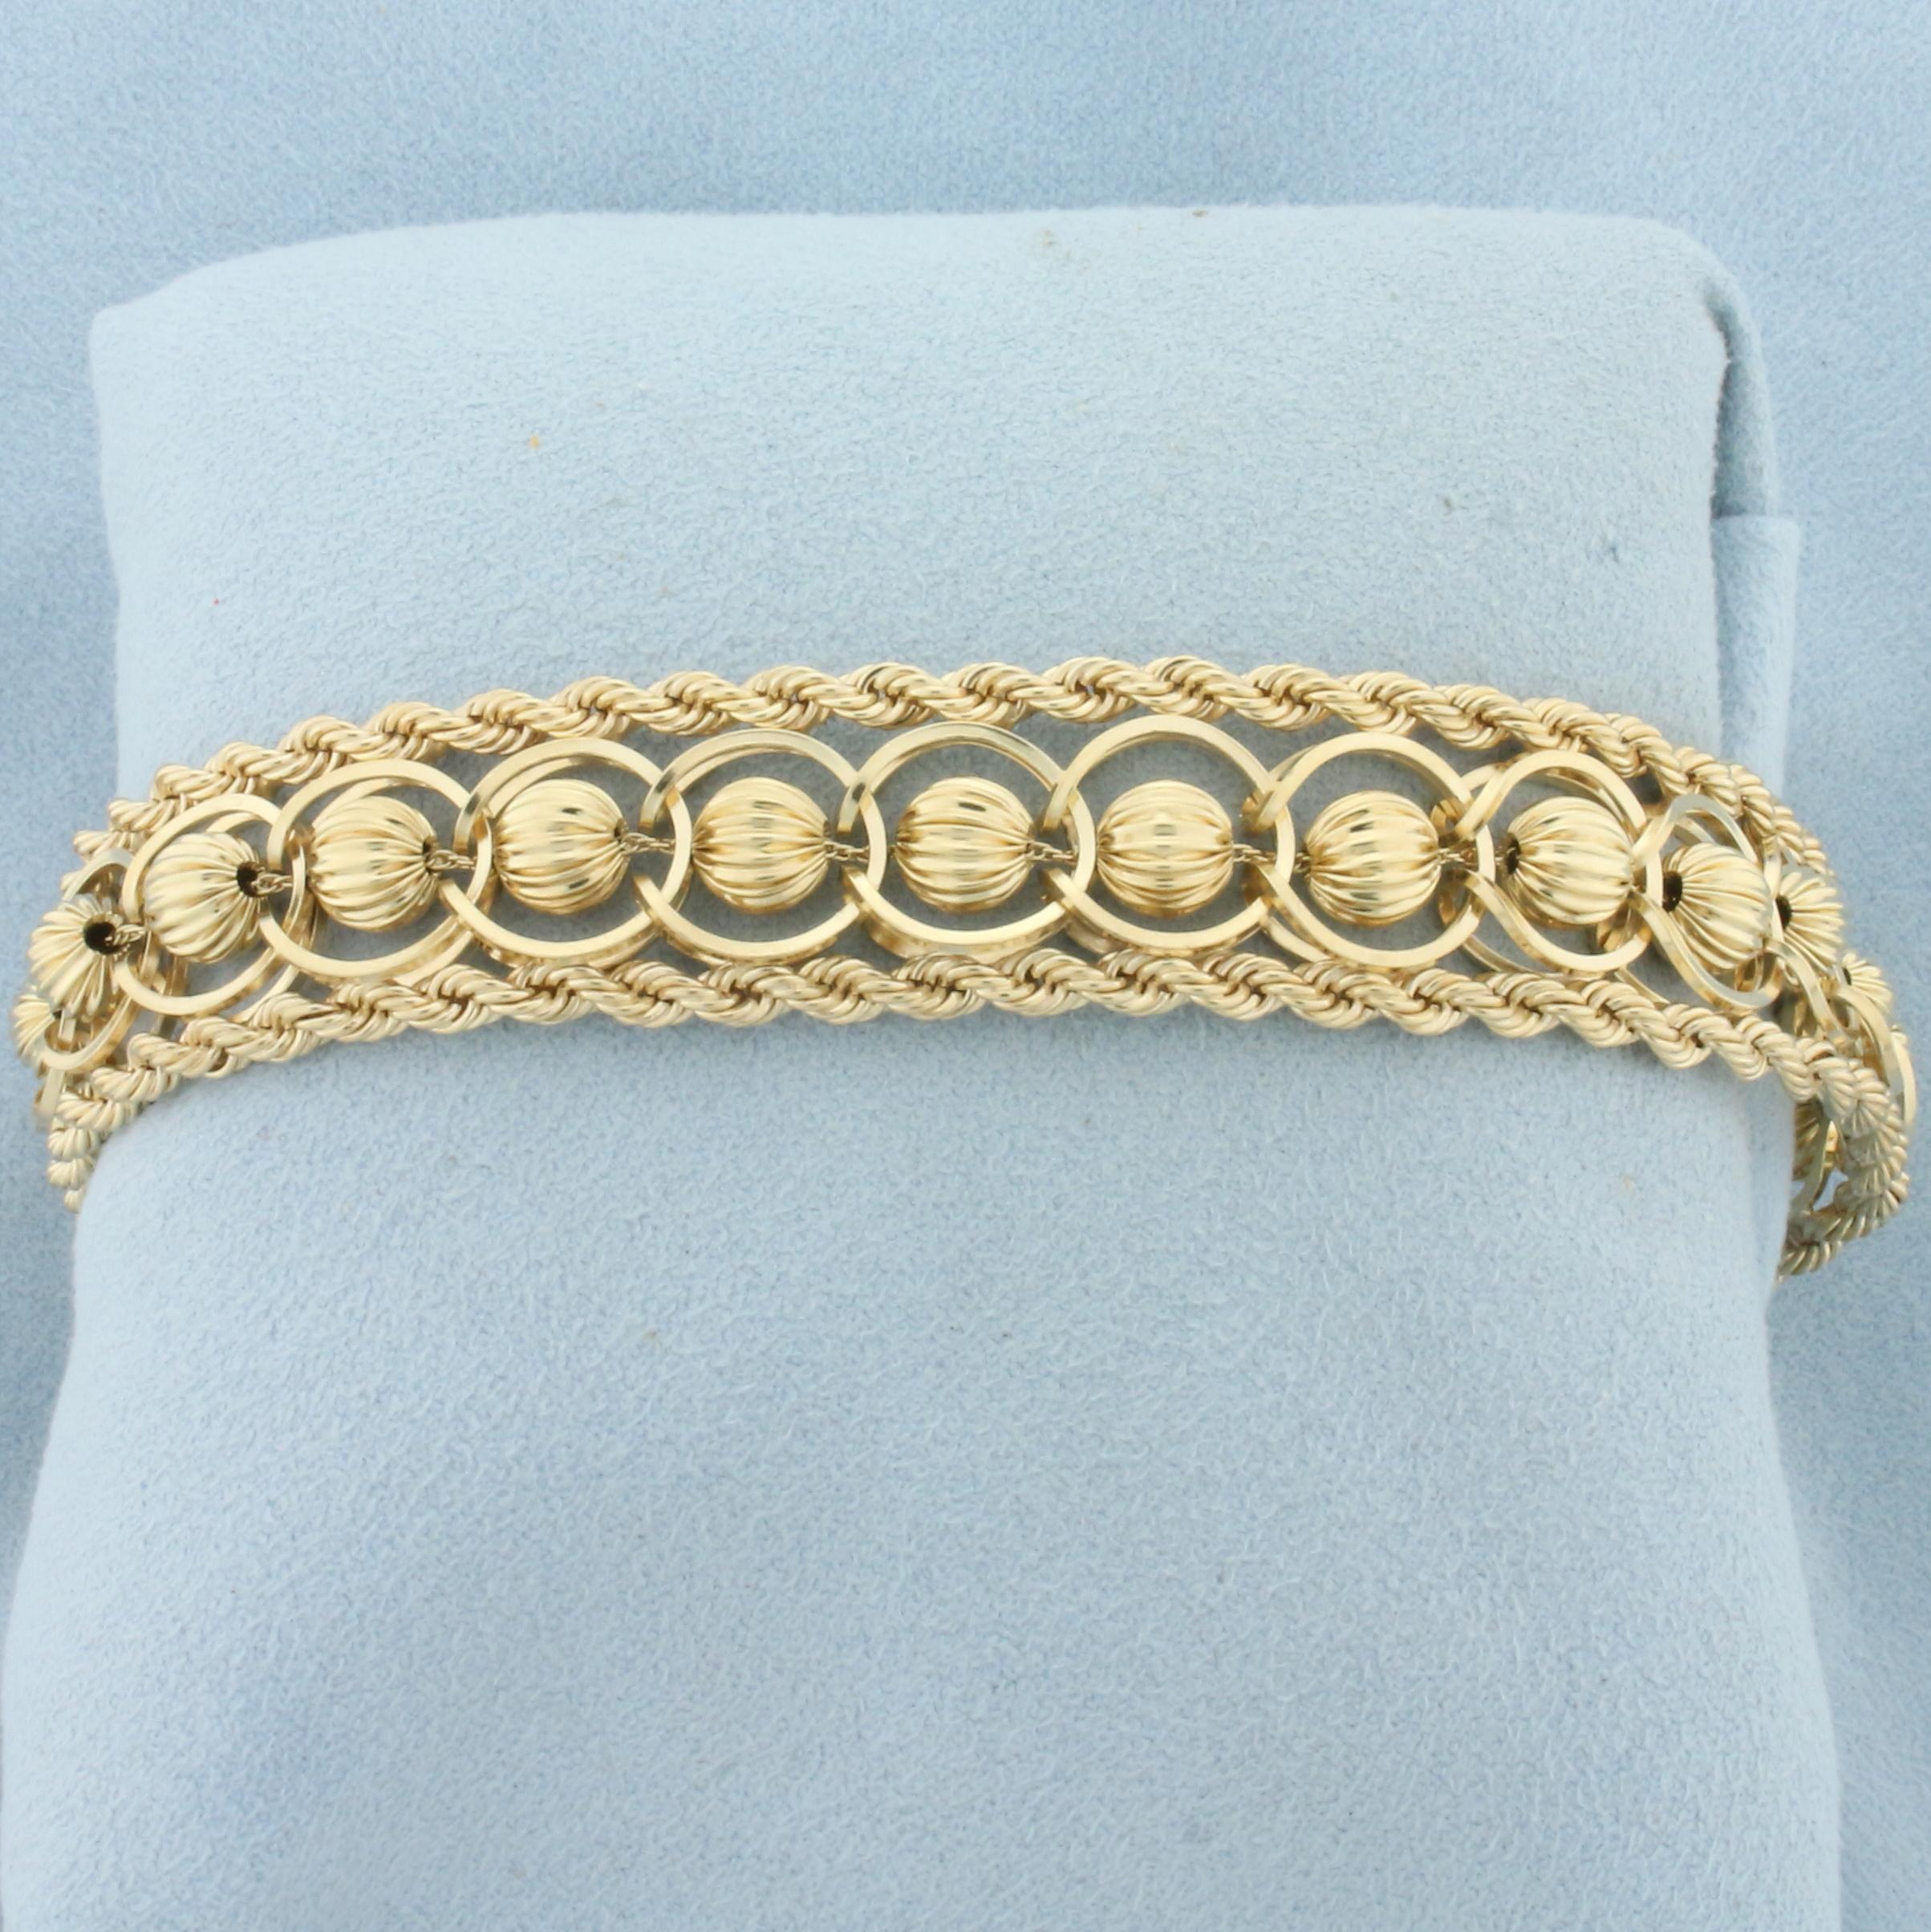 Designer Rope And Scalloped Bead Charm Bracelet In 14k Yellow Gold